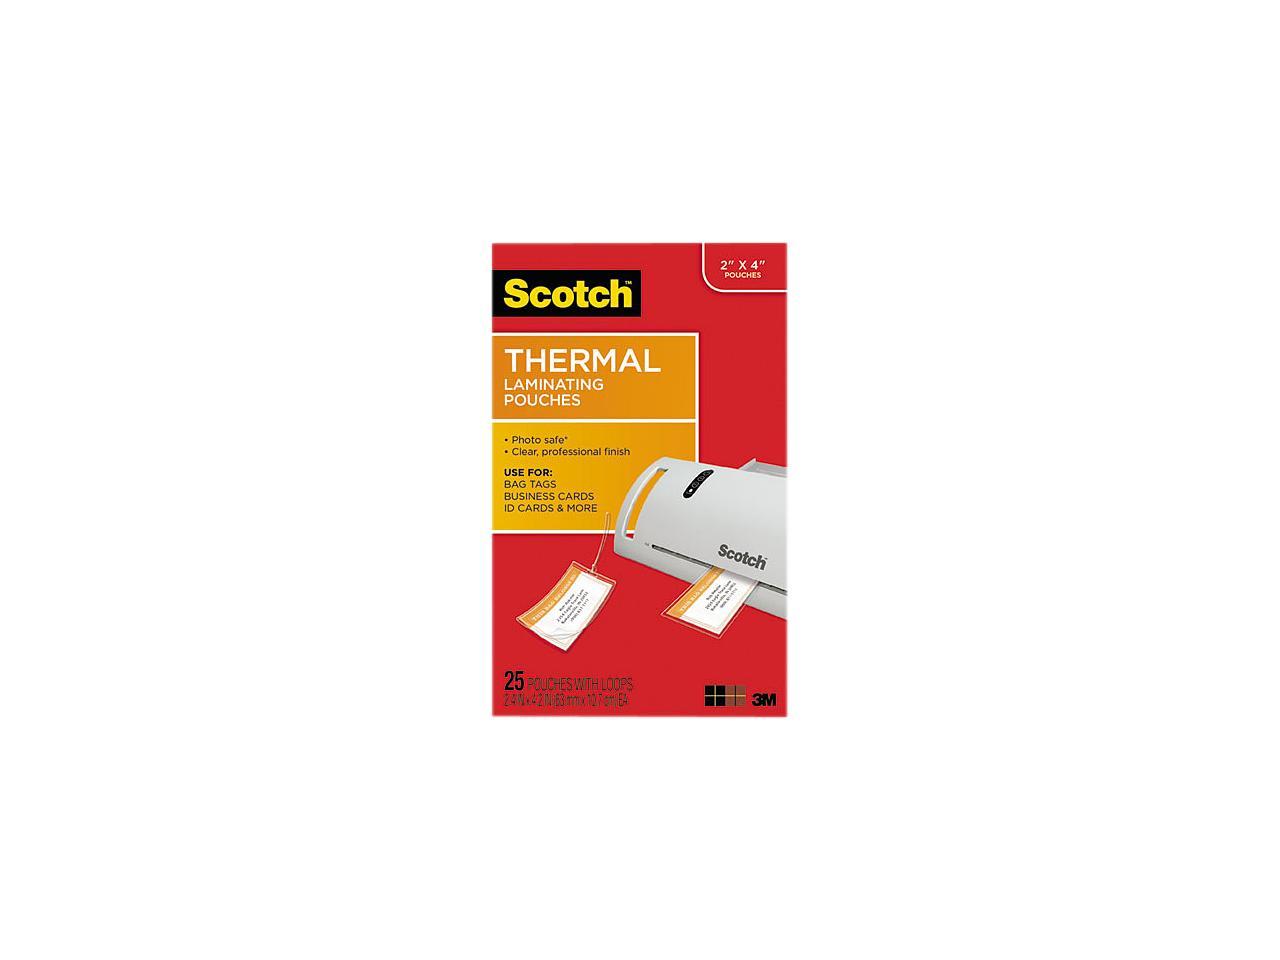 Scotch Thermal Laminating Pouches, Bag Tags with Loops